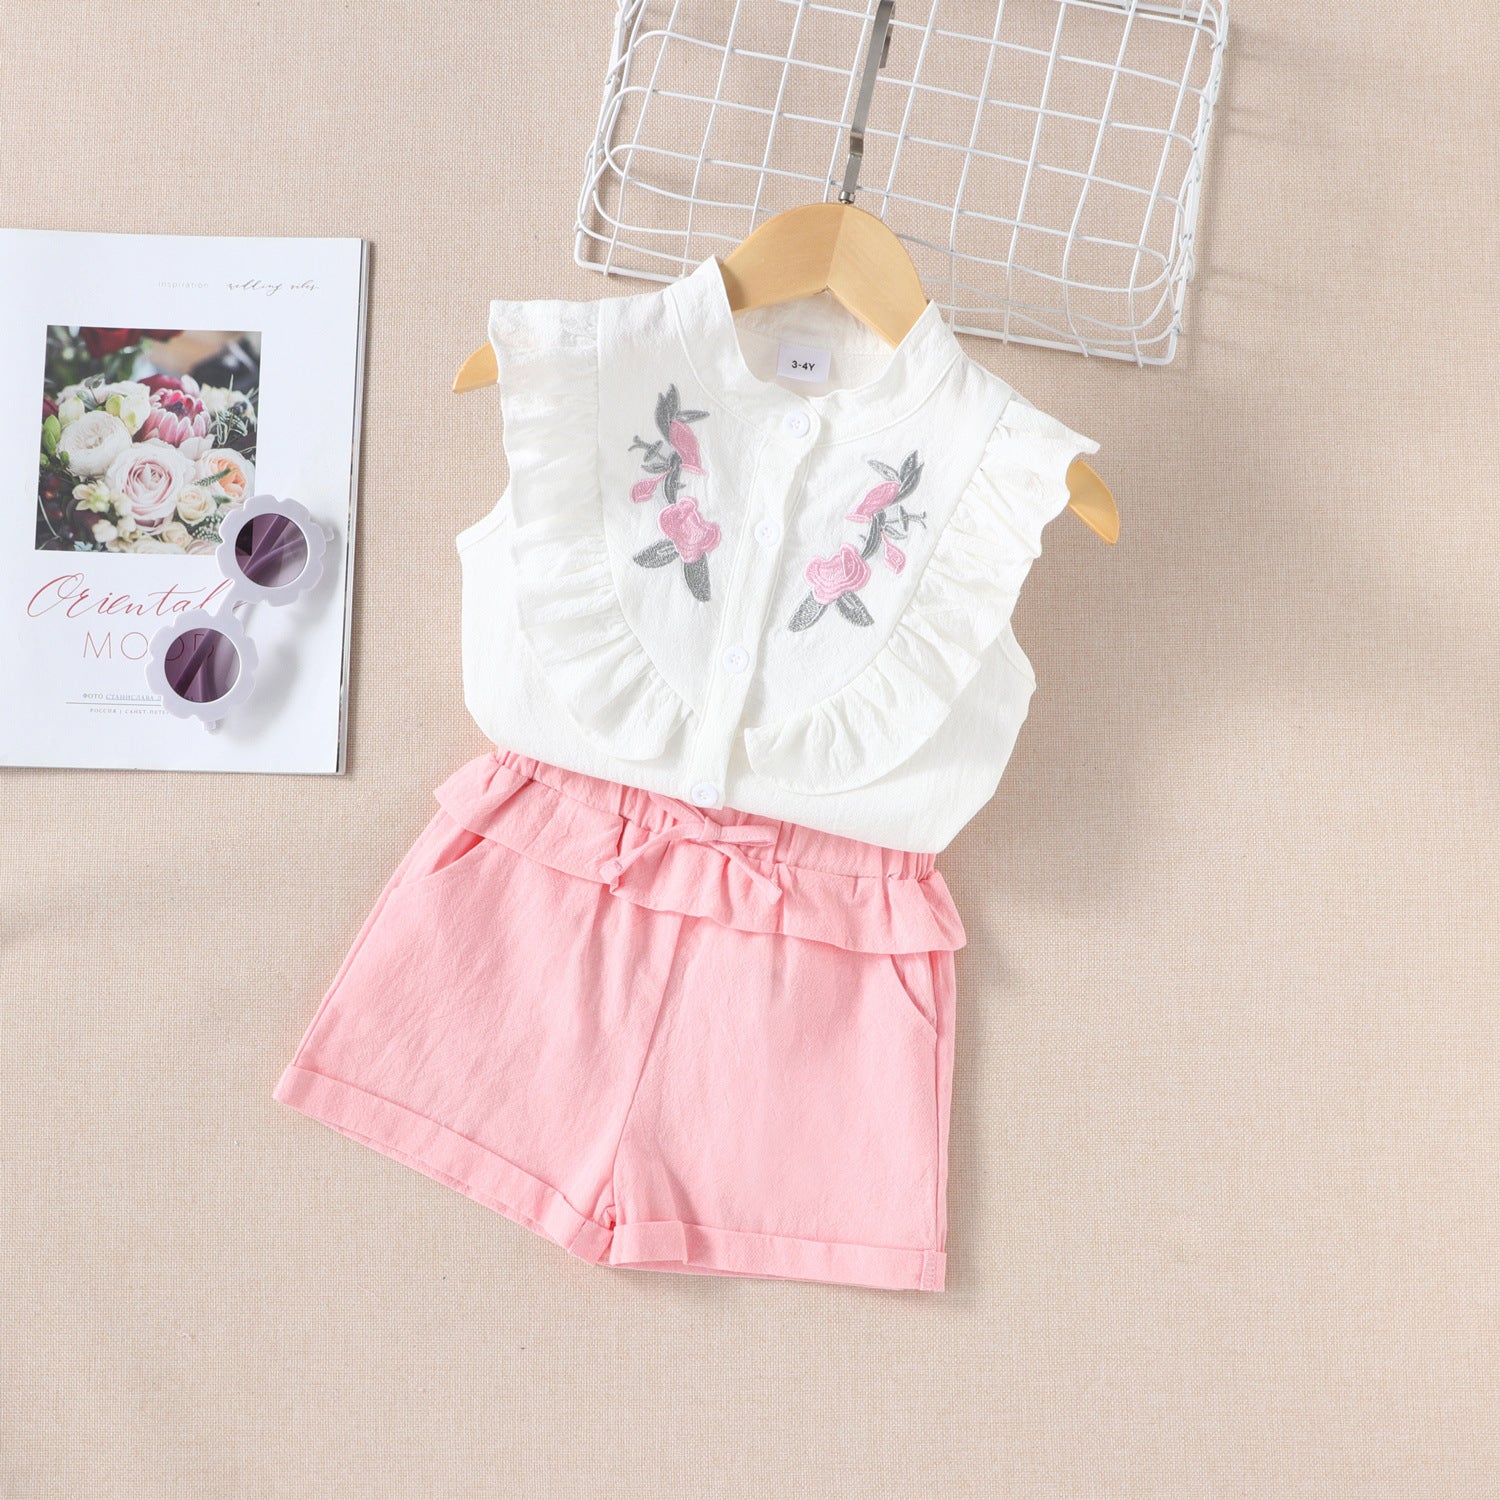 New Children's Summer New Sleeveless Embroidered Shirt Top Shorts Two-piece Set